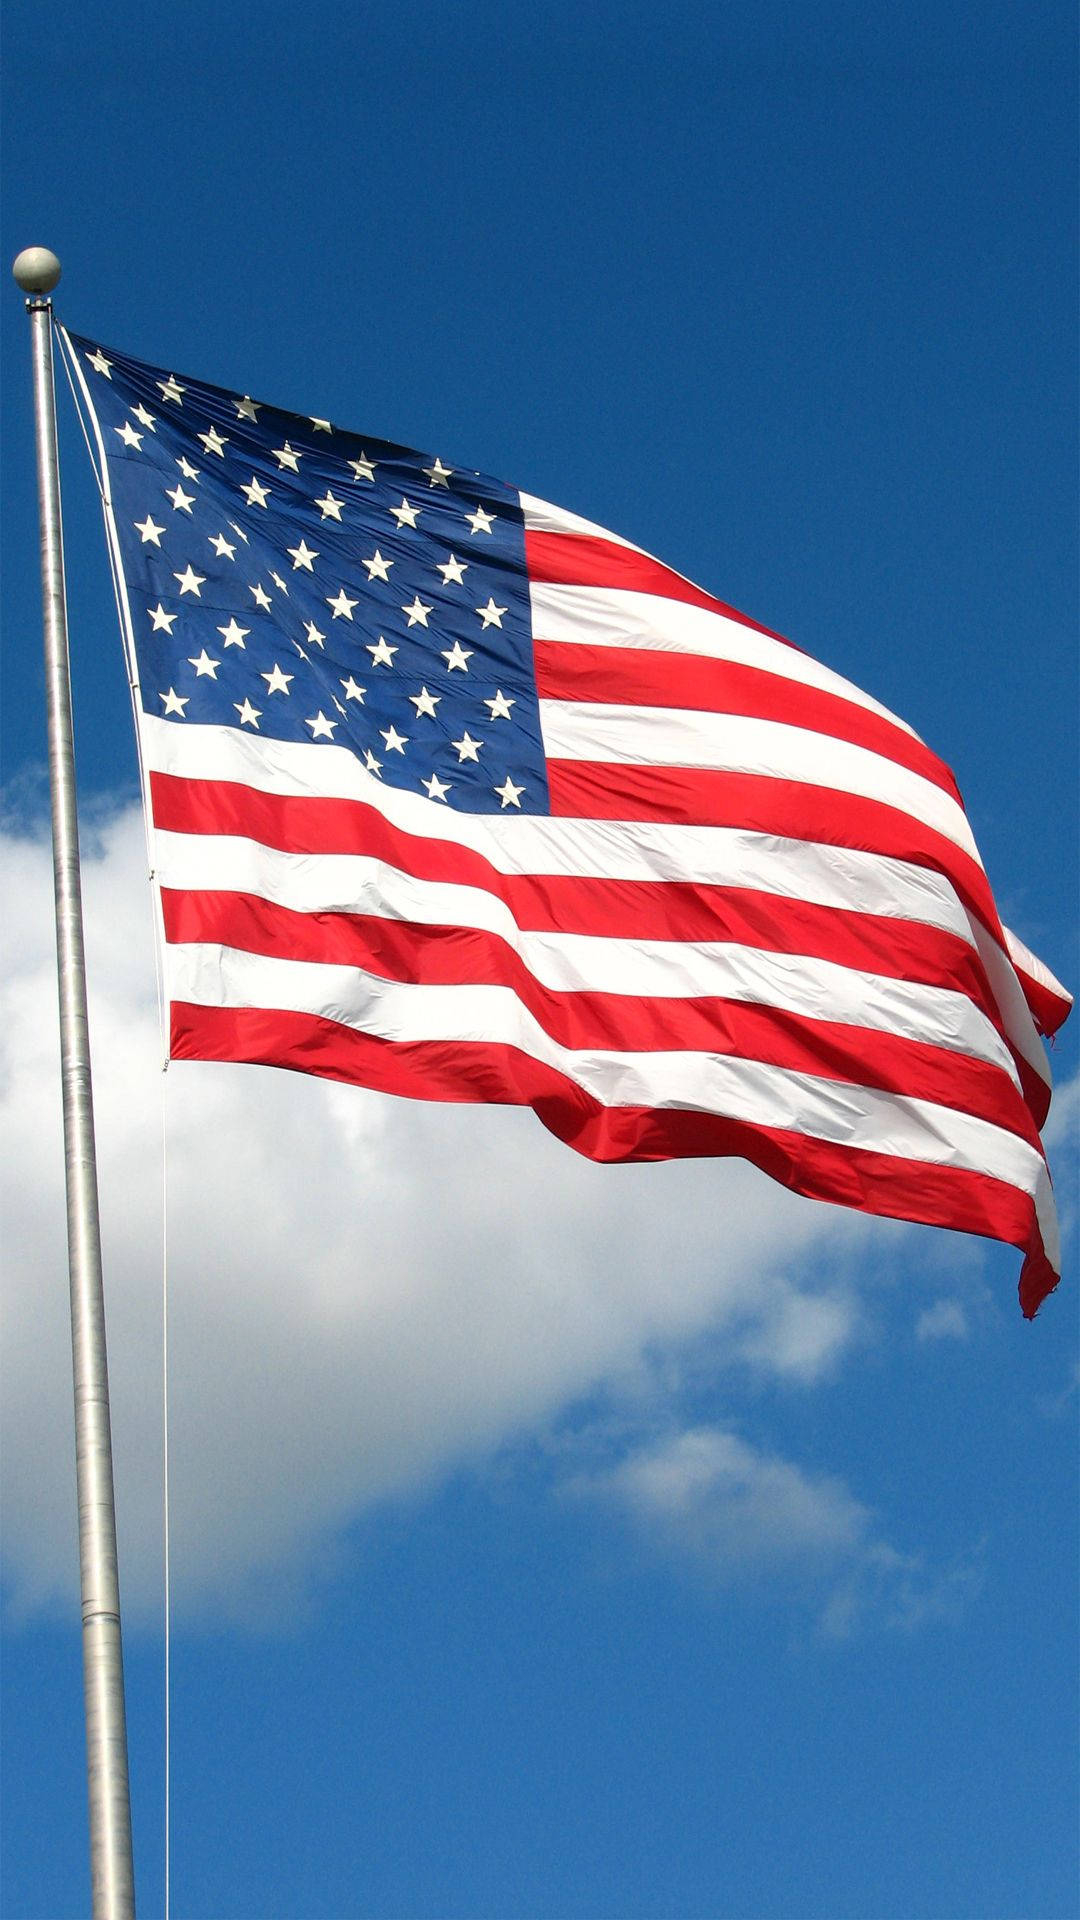 1080x1920 Download Usa American Flag In Pole Wallpaper